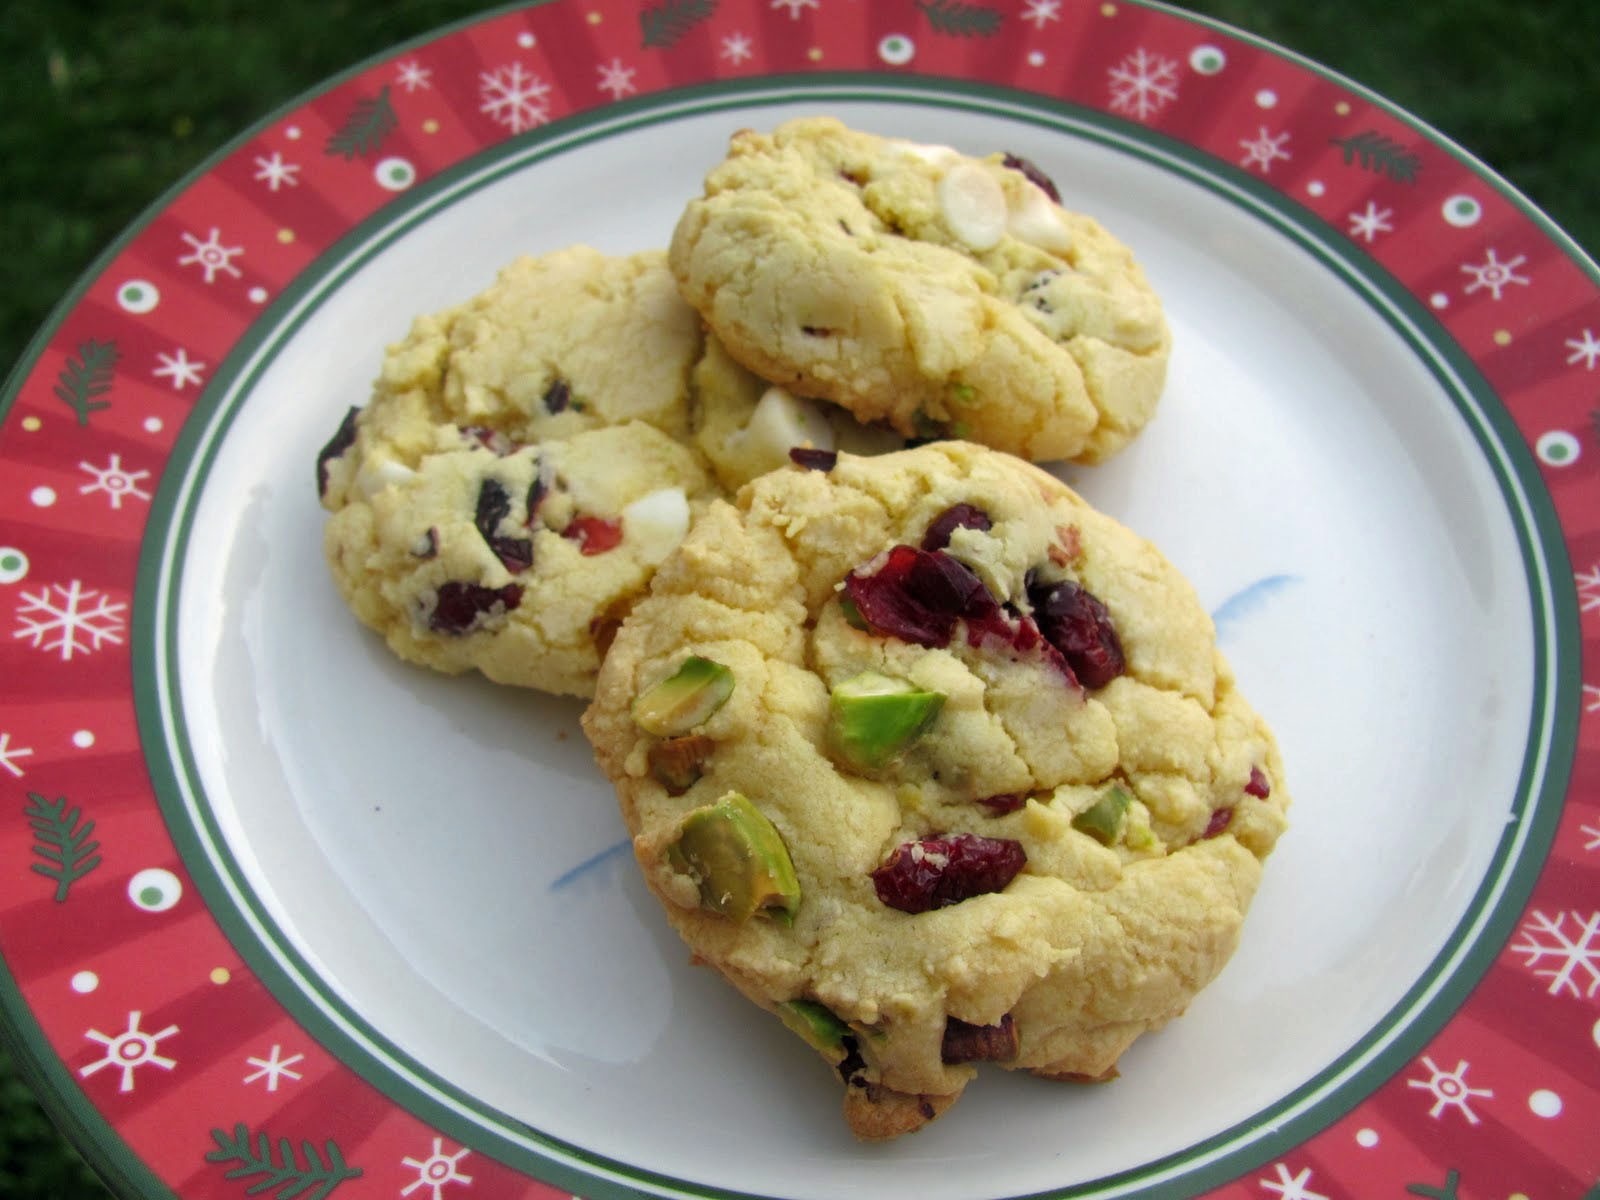 Cranberry Christmas Cookies
 The Girly Girl Cooks Cranberry Pistachio Christmas